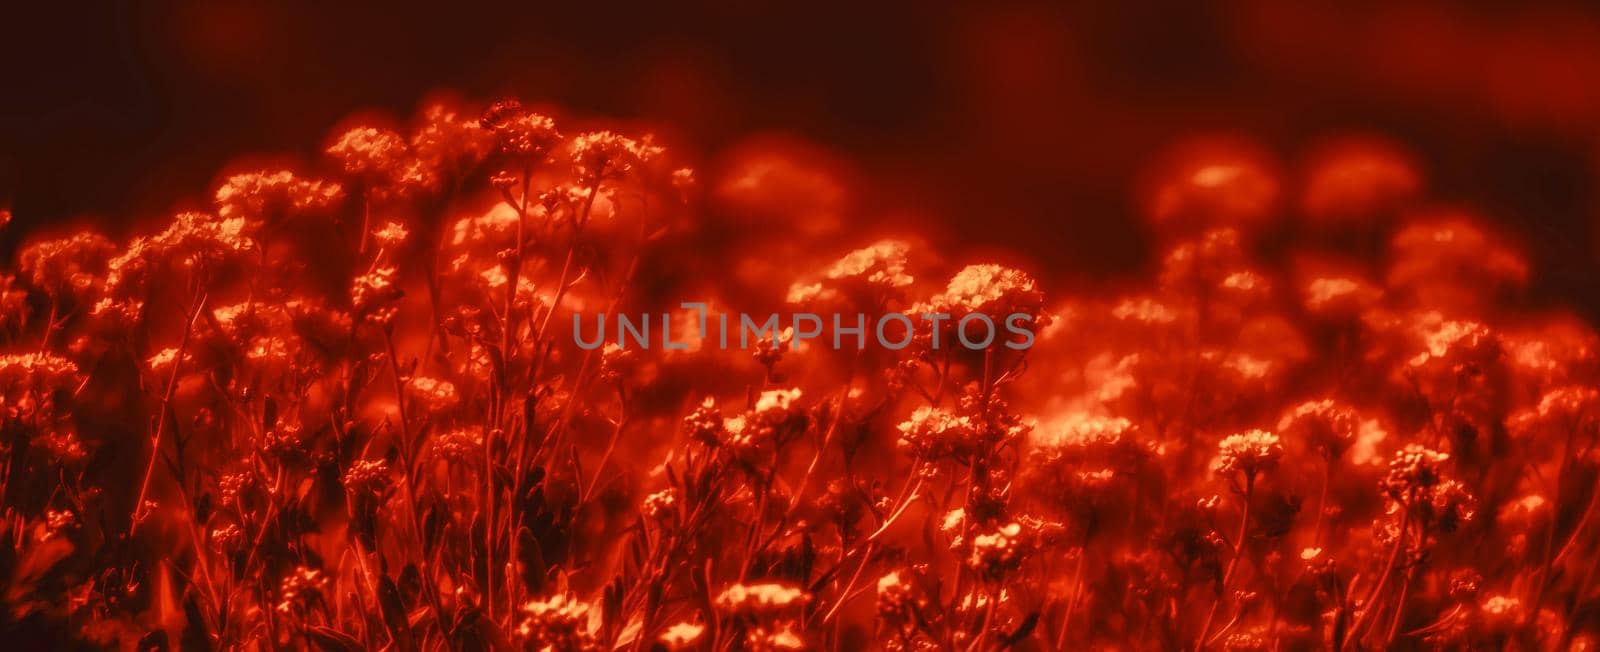 Natural background and texture. Soft focus image of small flowers of aurinia saxatilis in a dramatic red tone